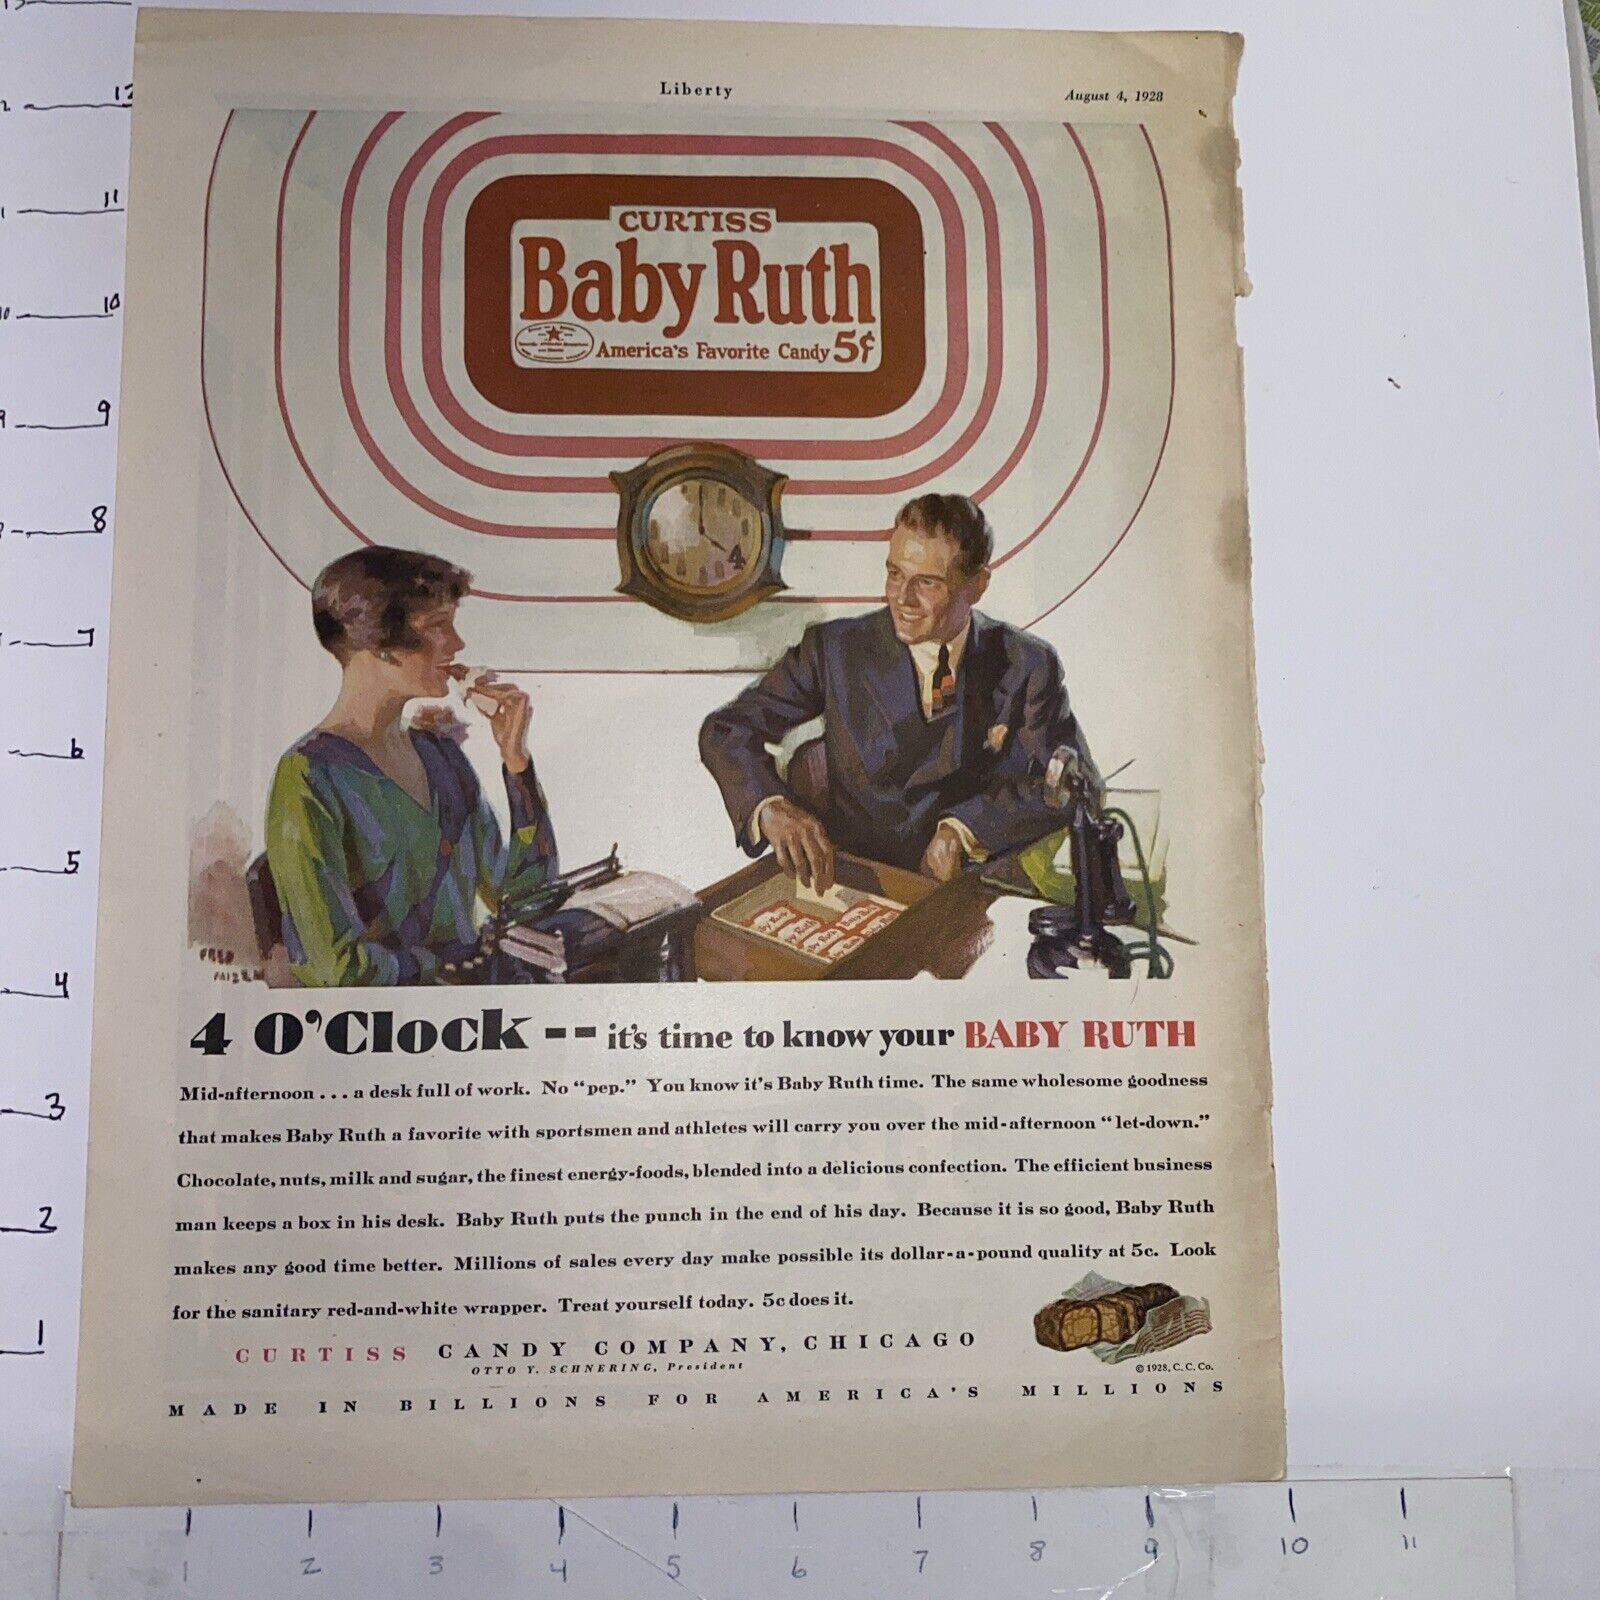 Vintage Baby Ruth Curtiss Chicago Candy 1928 Liberty White Packaging